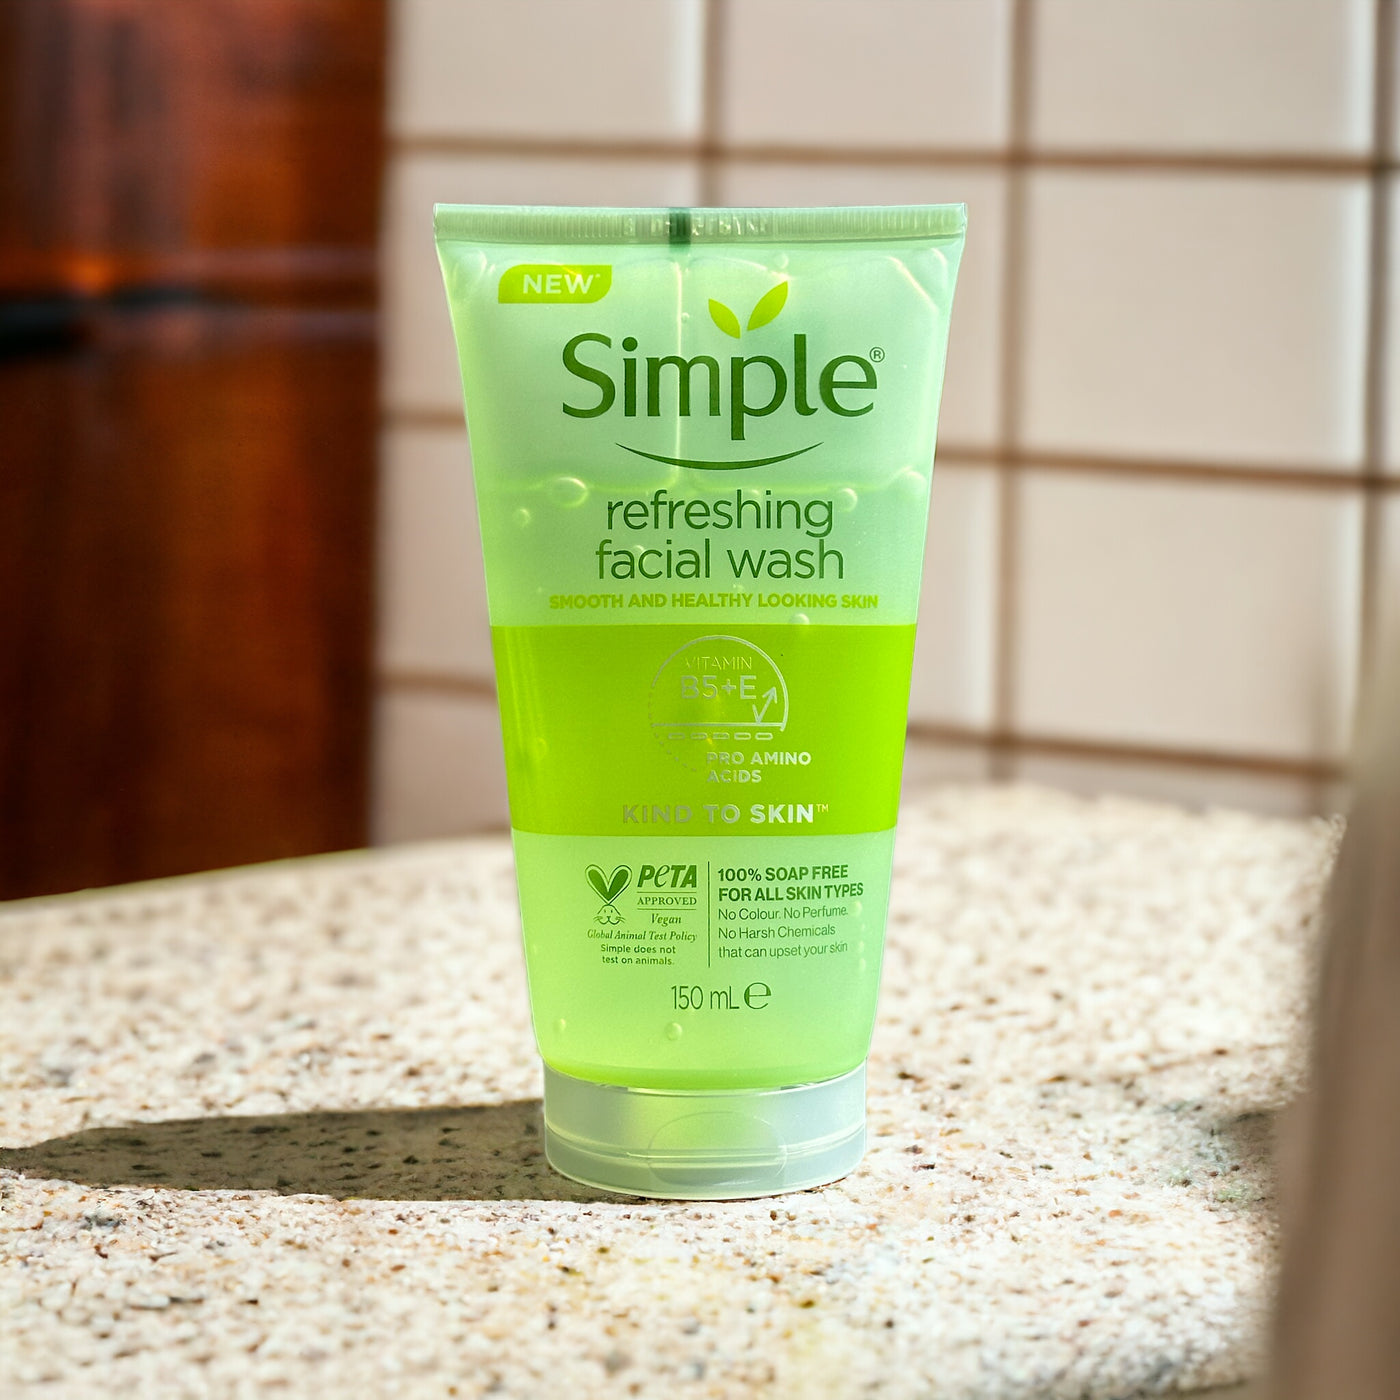 Simple Kind to Skin Refreshing Facial Wash